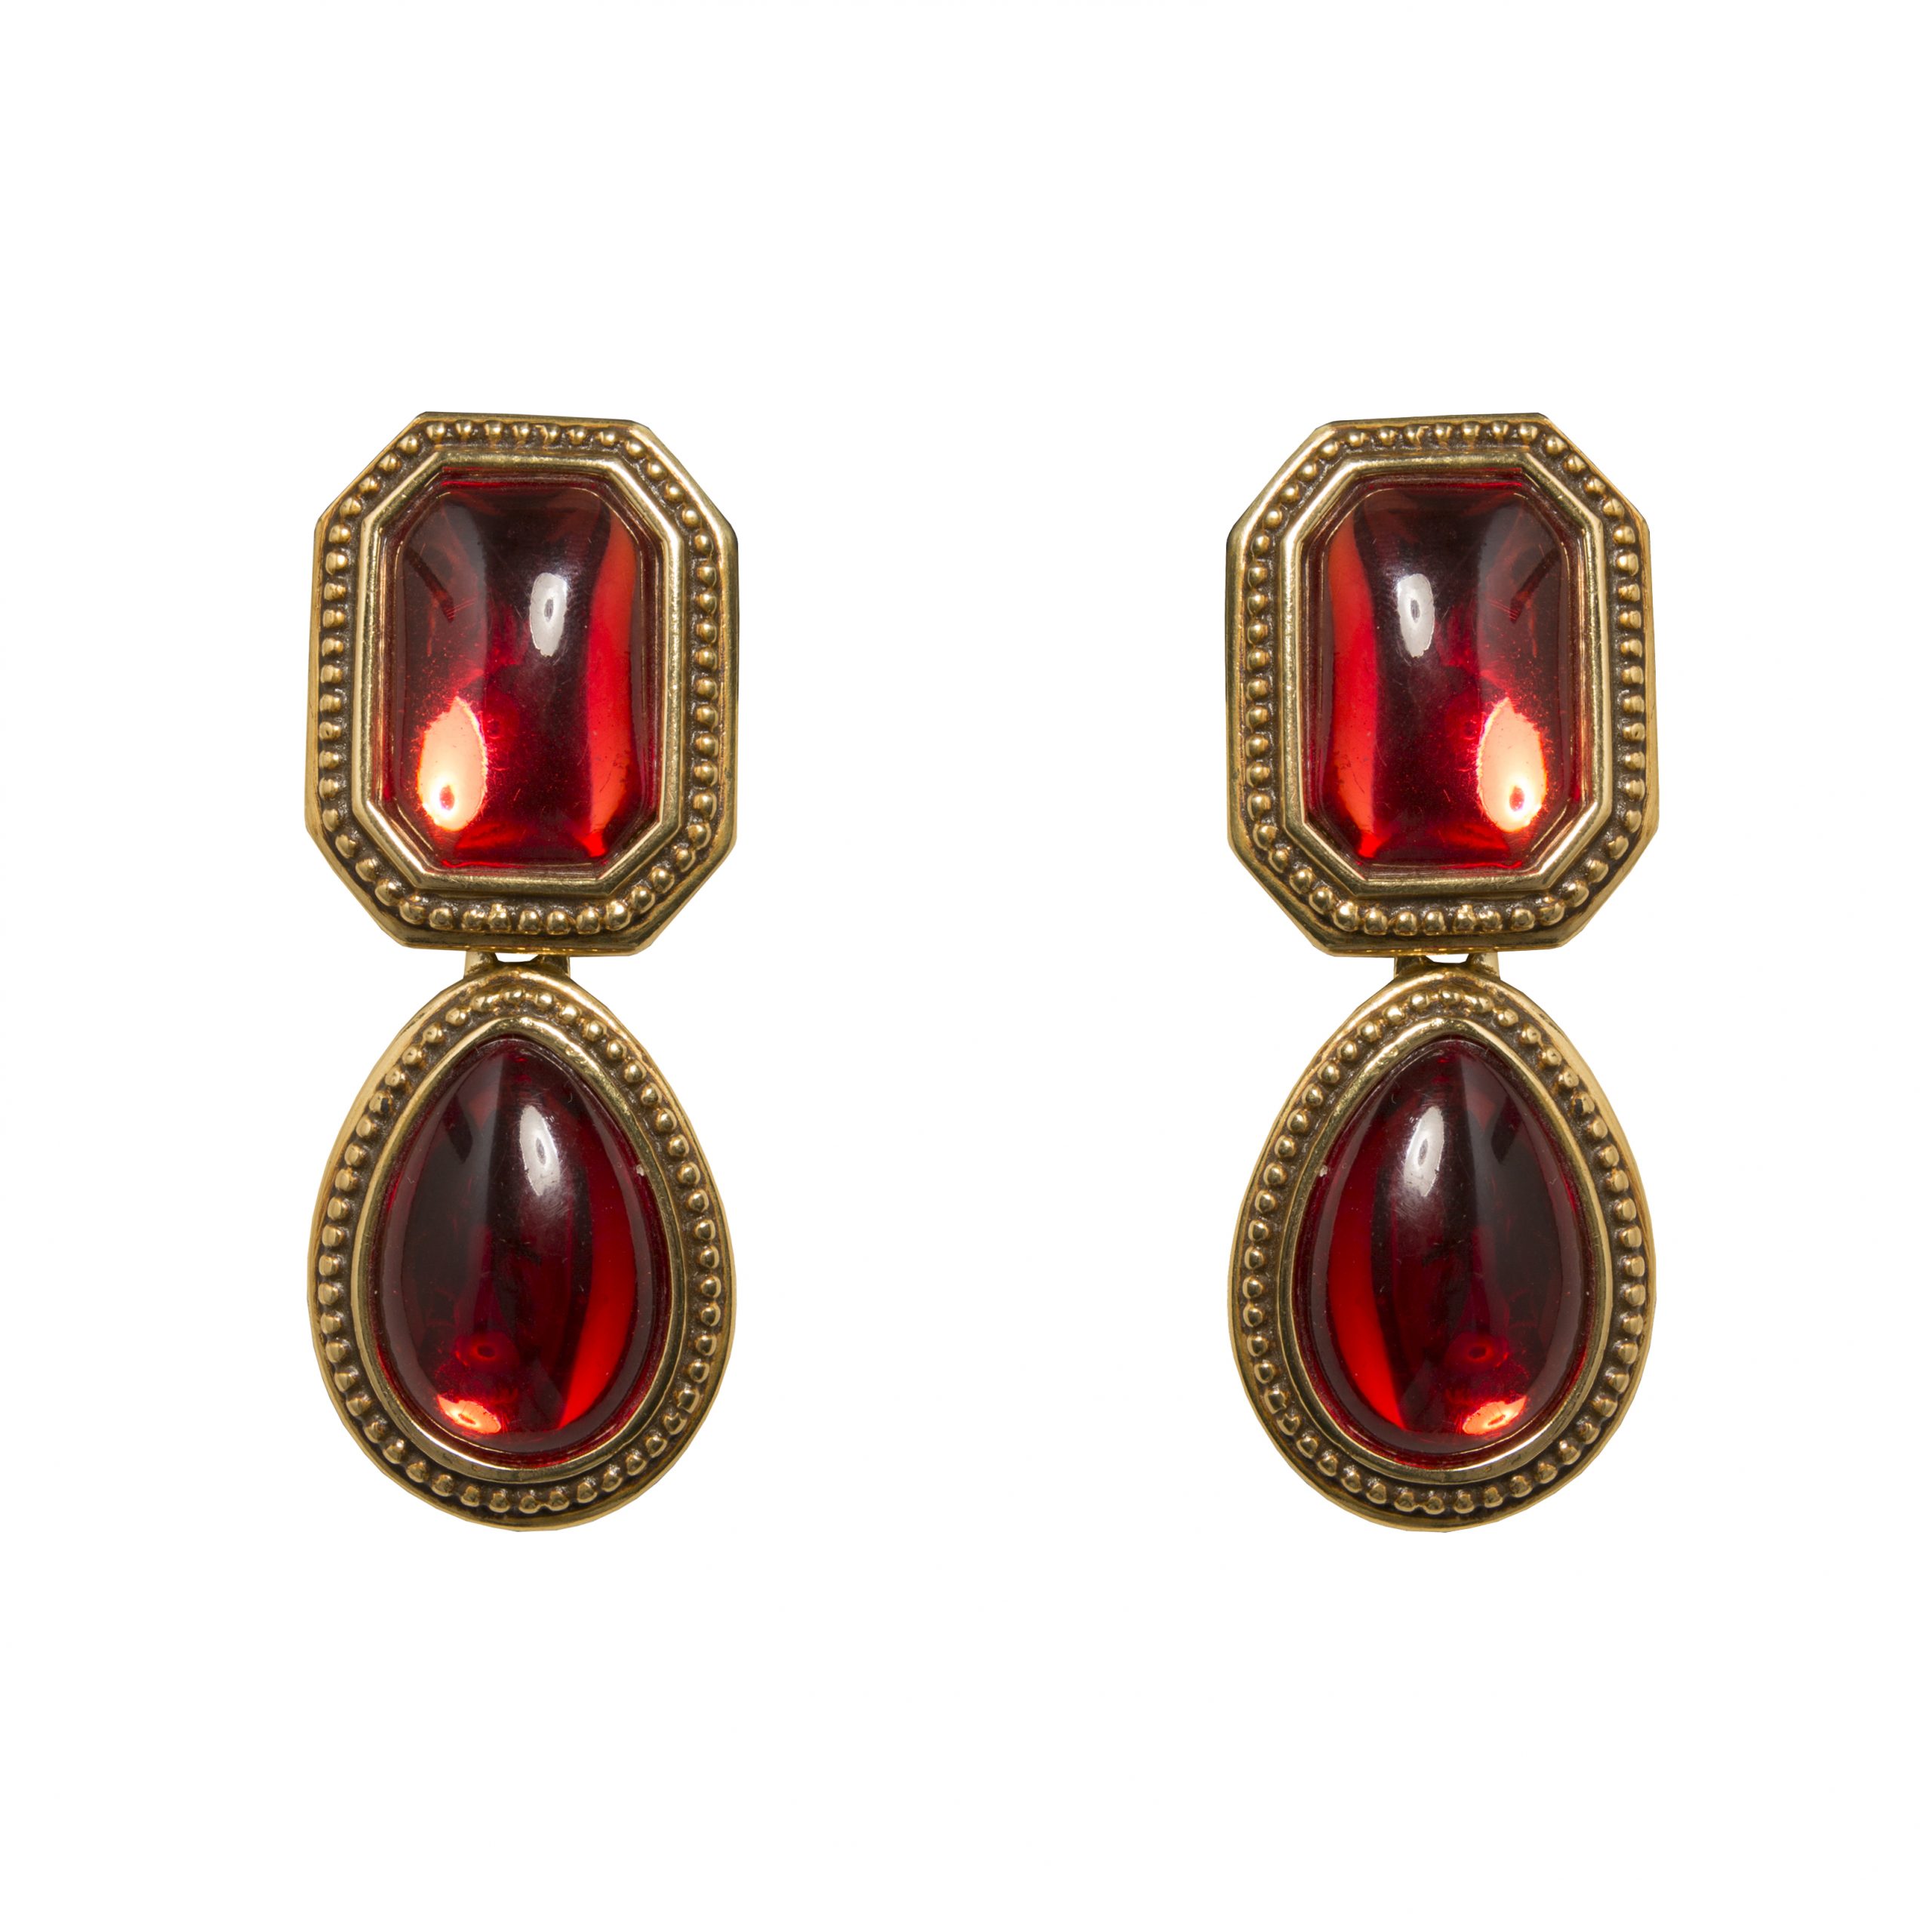 Vintage red glass cabochon earrings